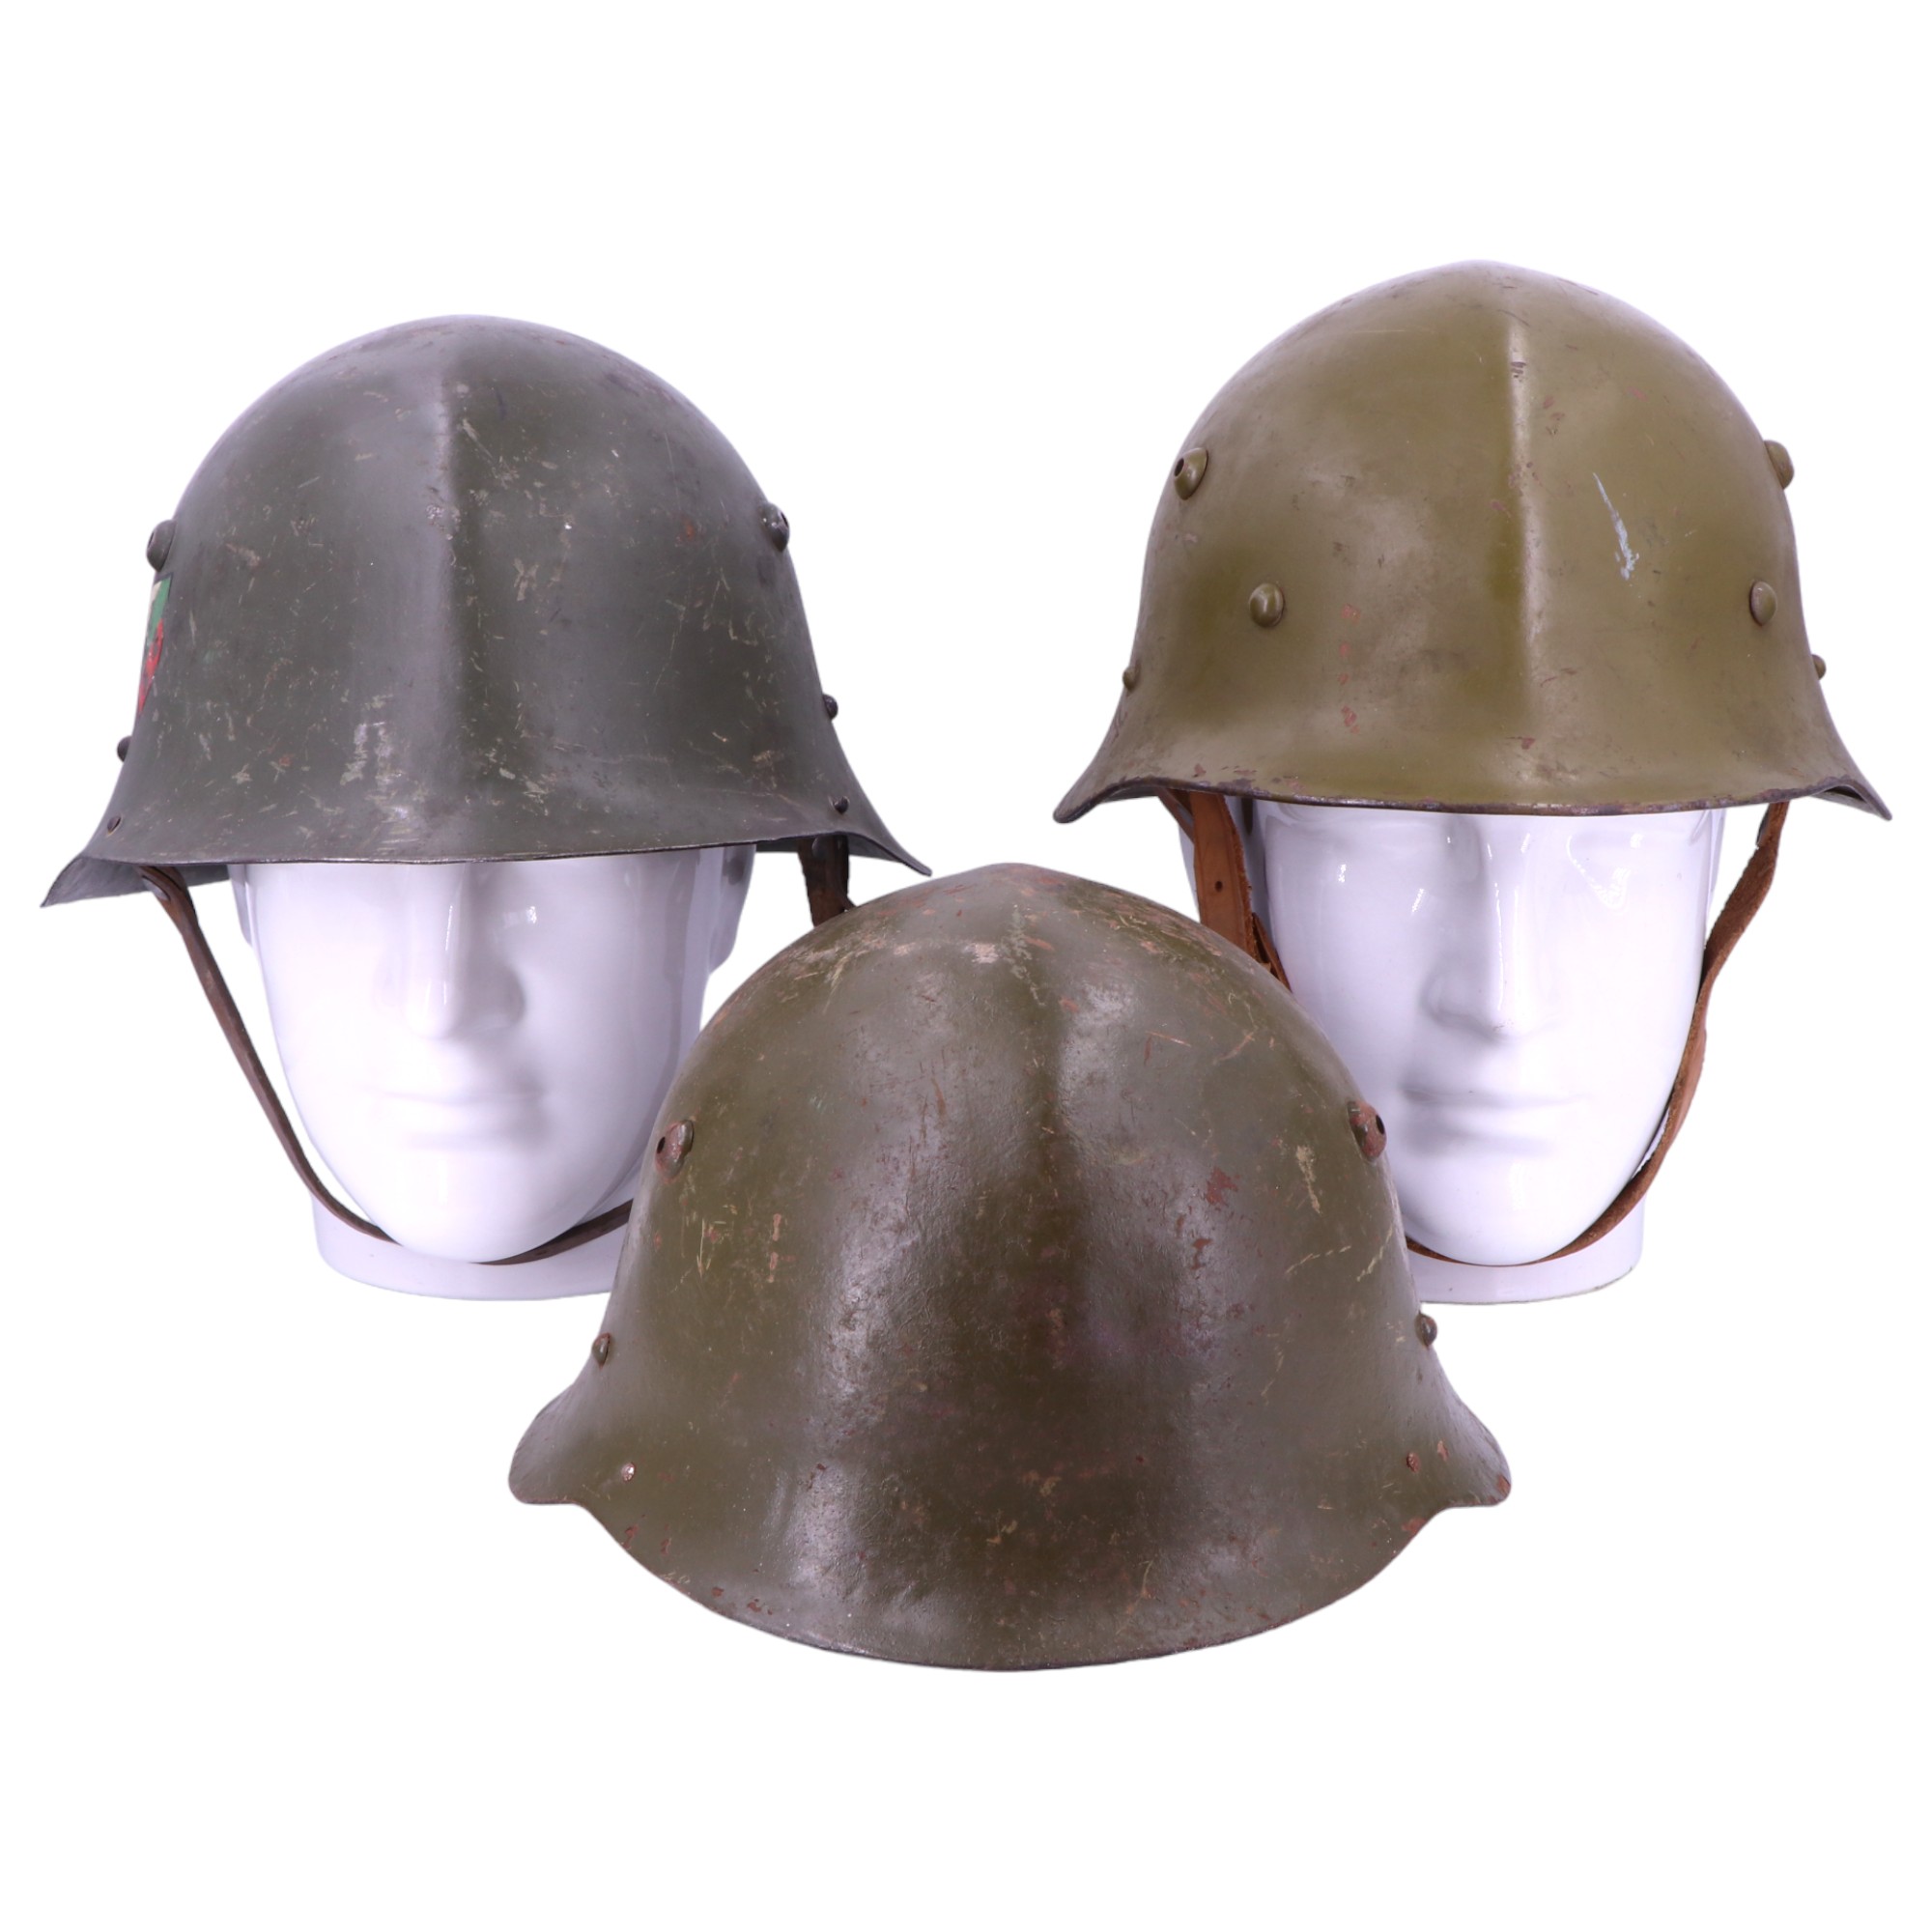 Bulgarian Army M36 helmets, types A, B and C